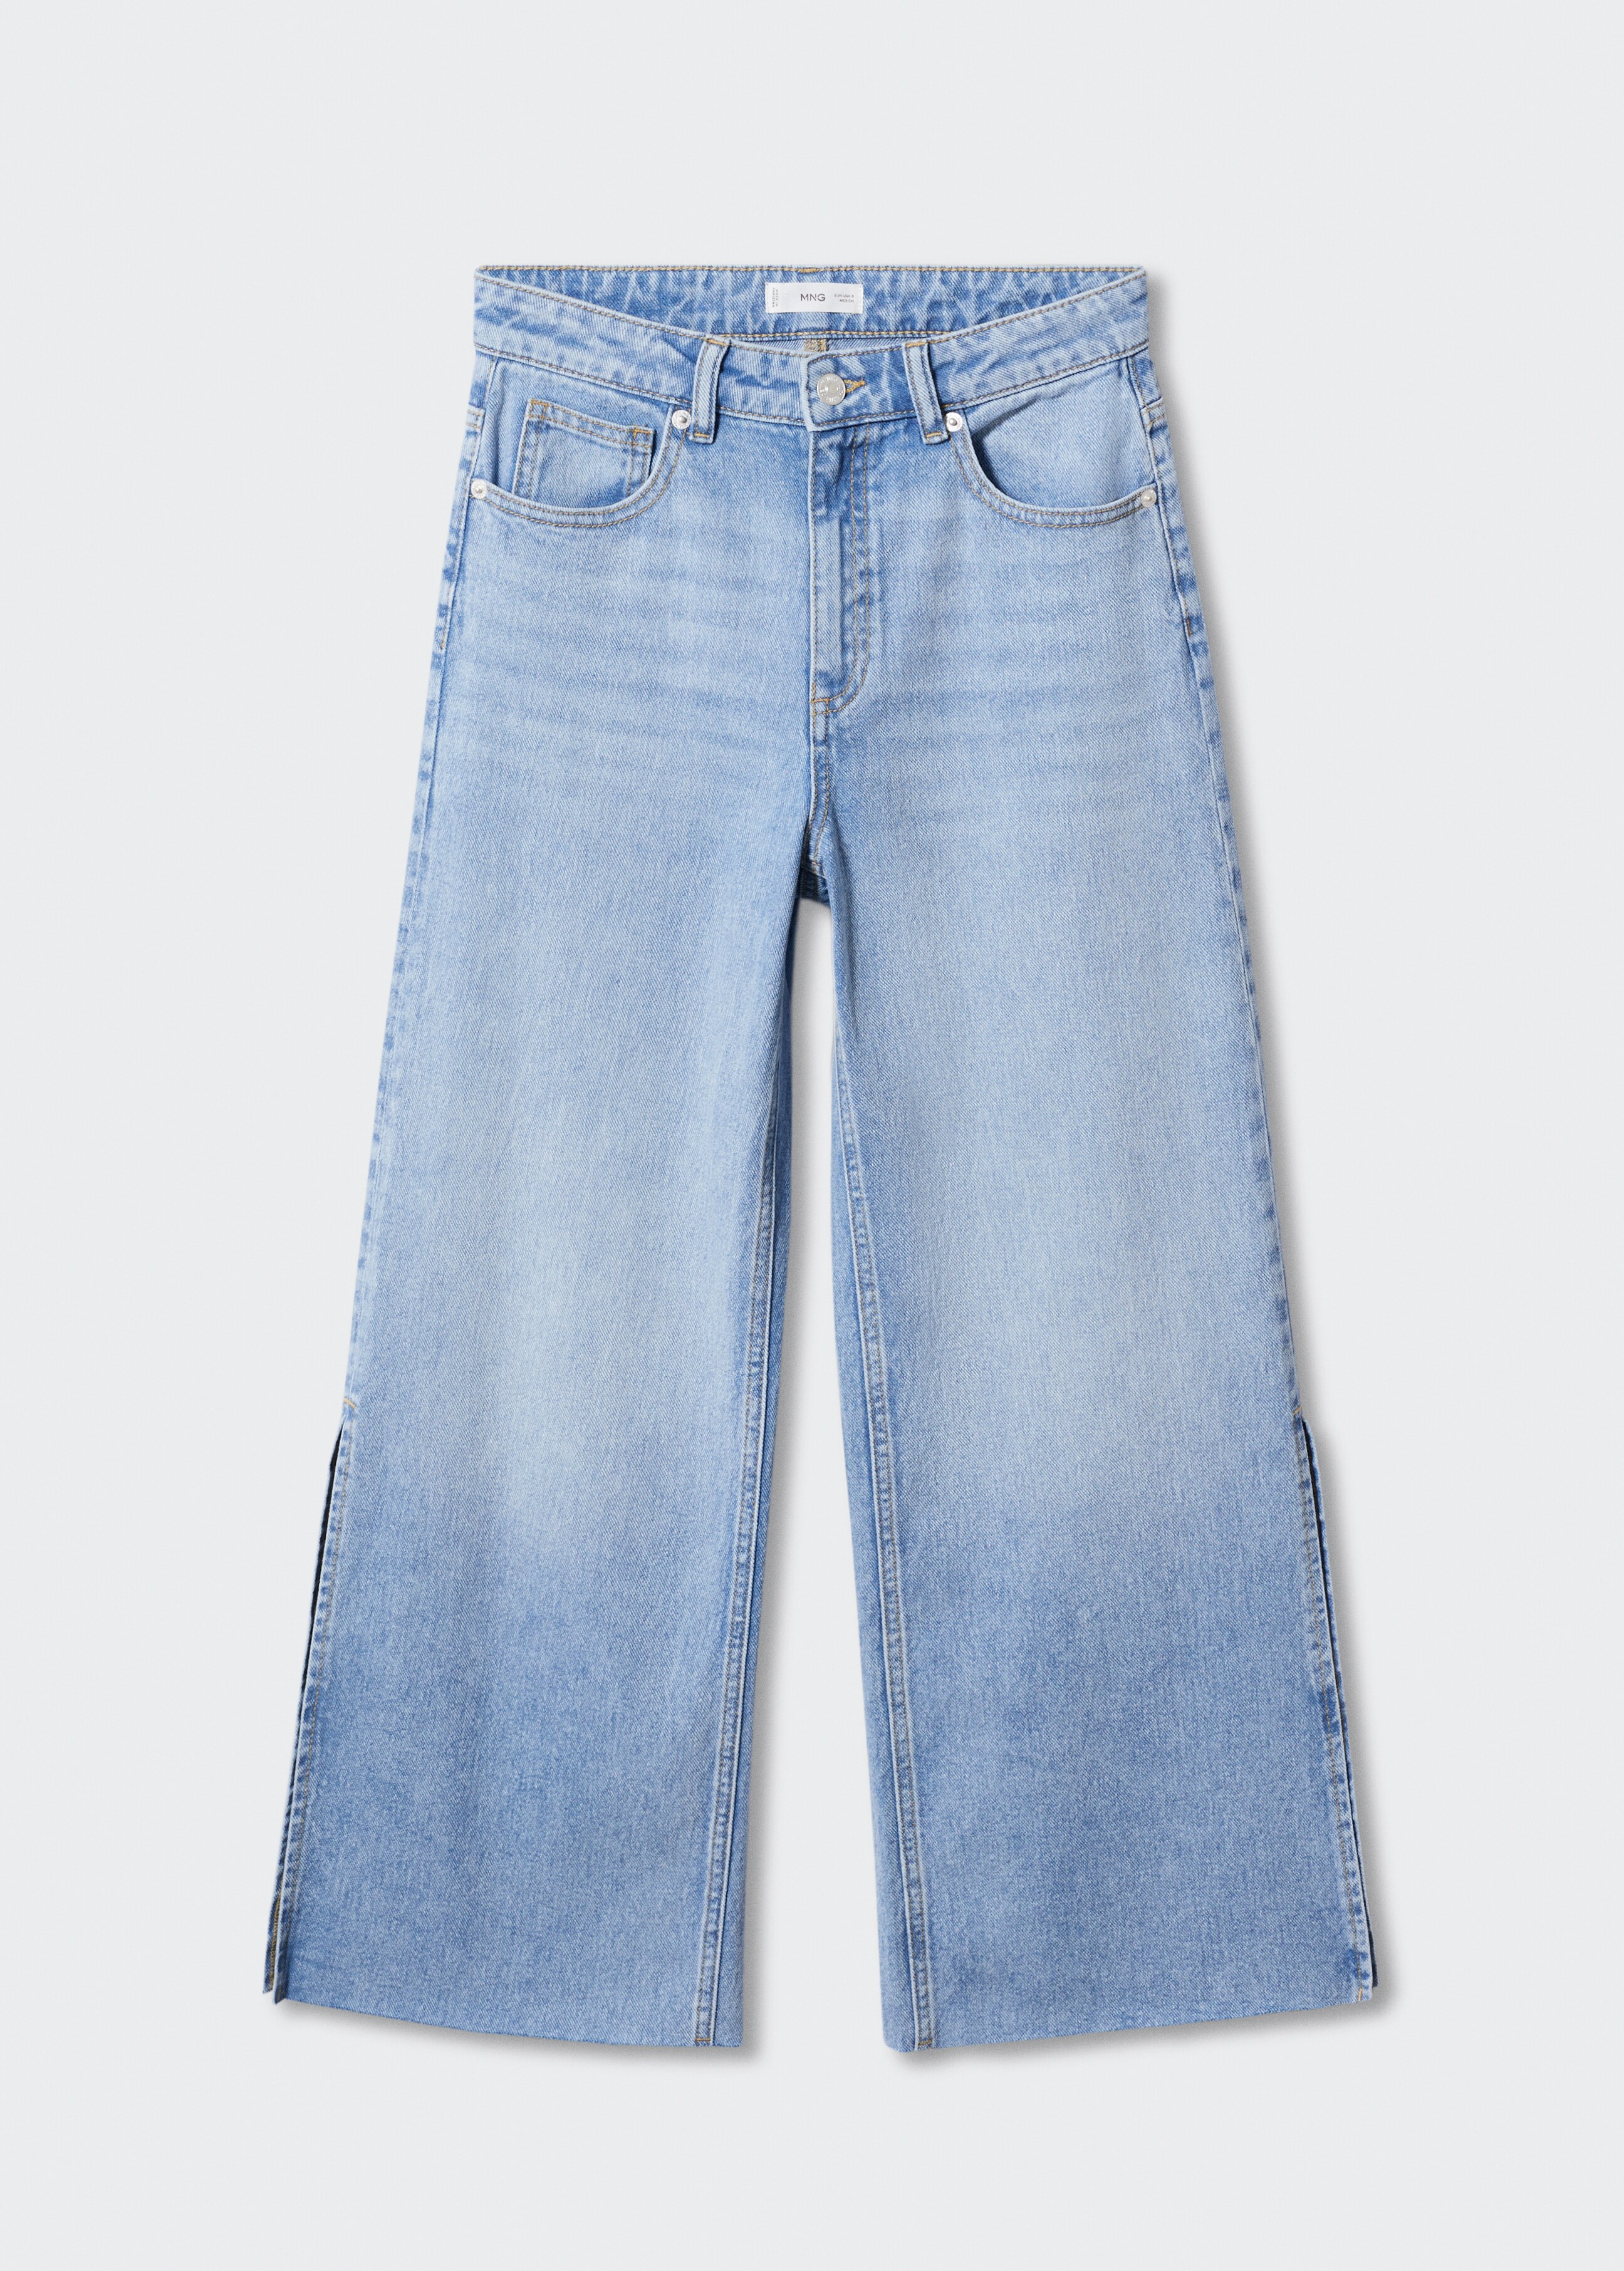 Culotte jeans with openings - Article without model